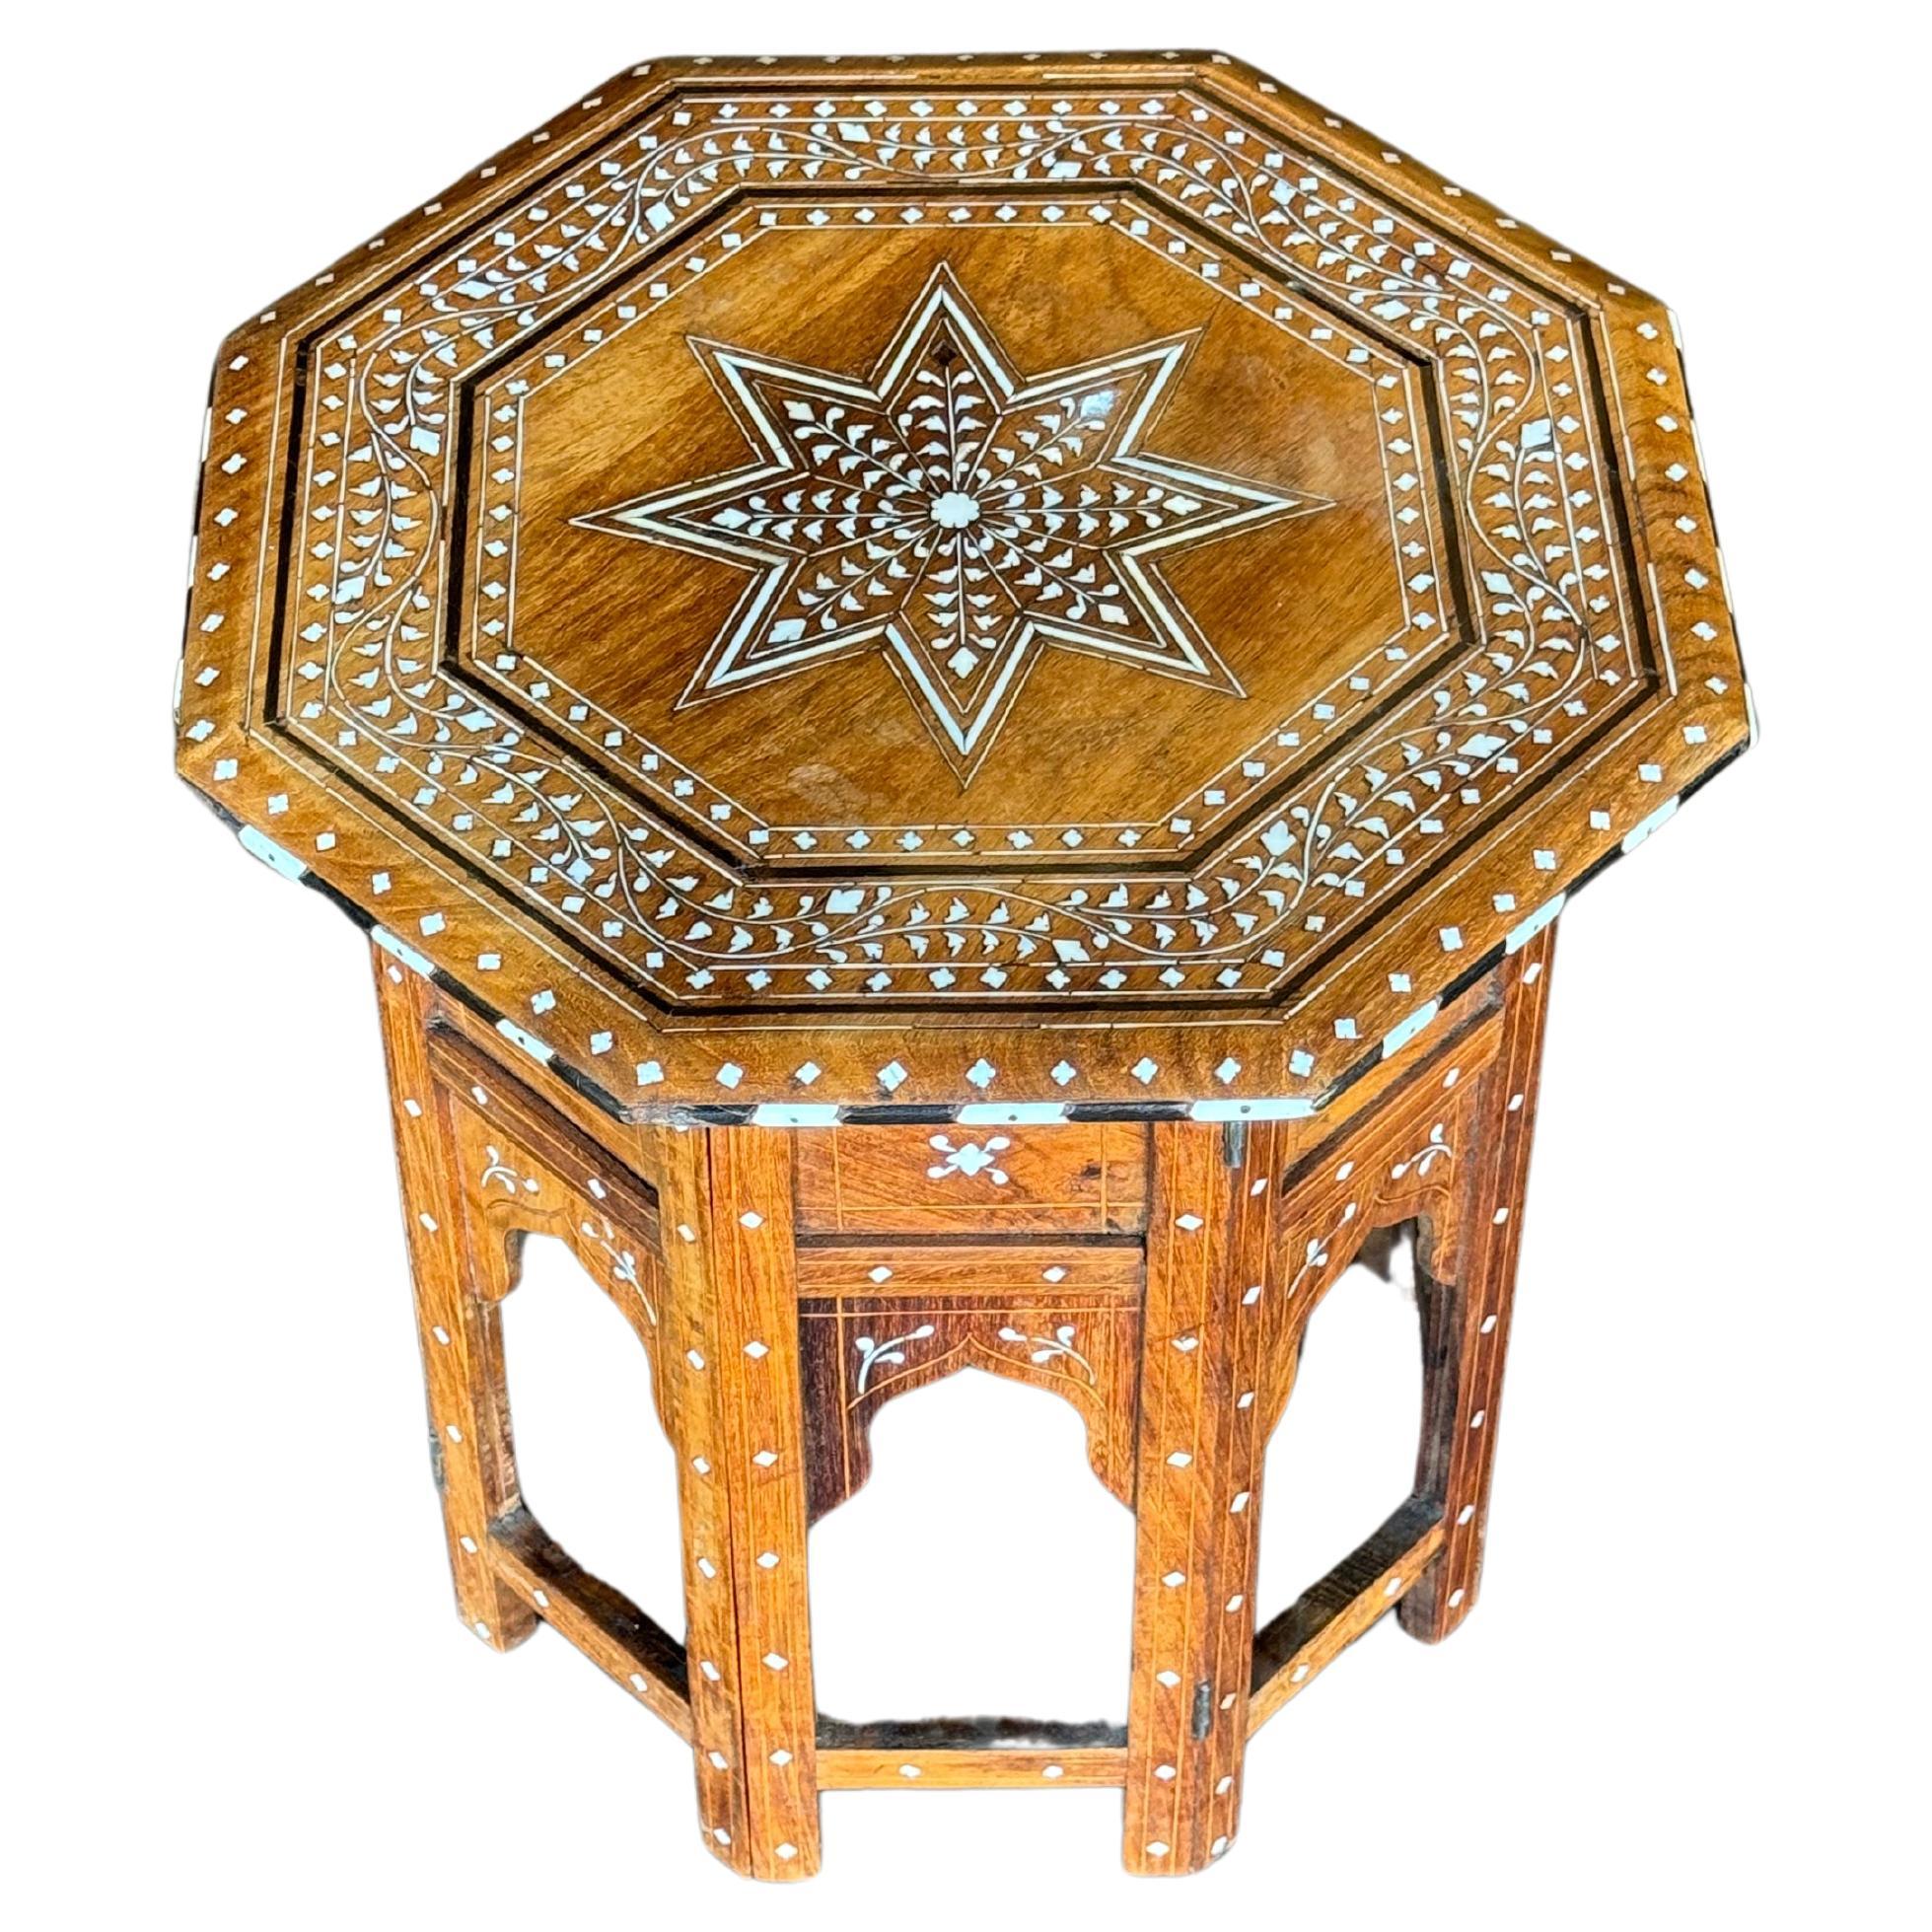 Vintage Moroccan Tea Table In Excellent Condition For Sale In West Hollywood, CA